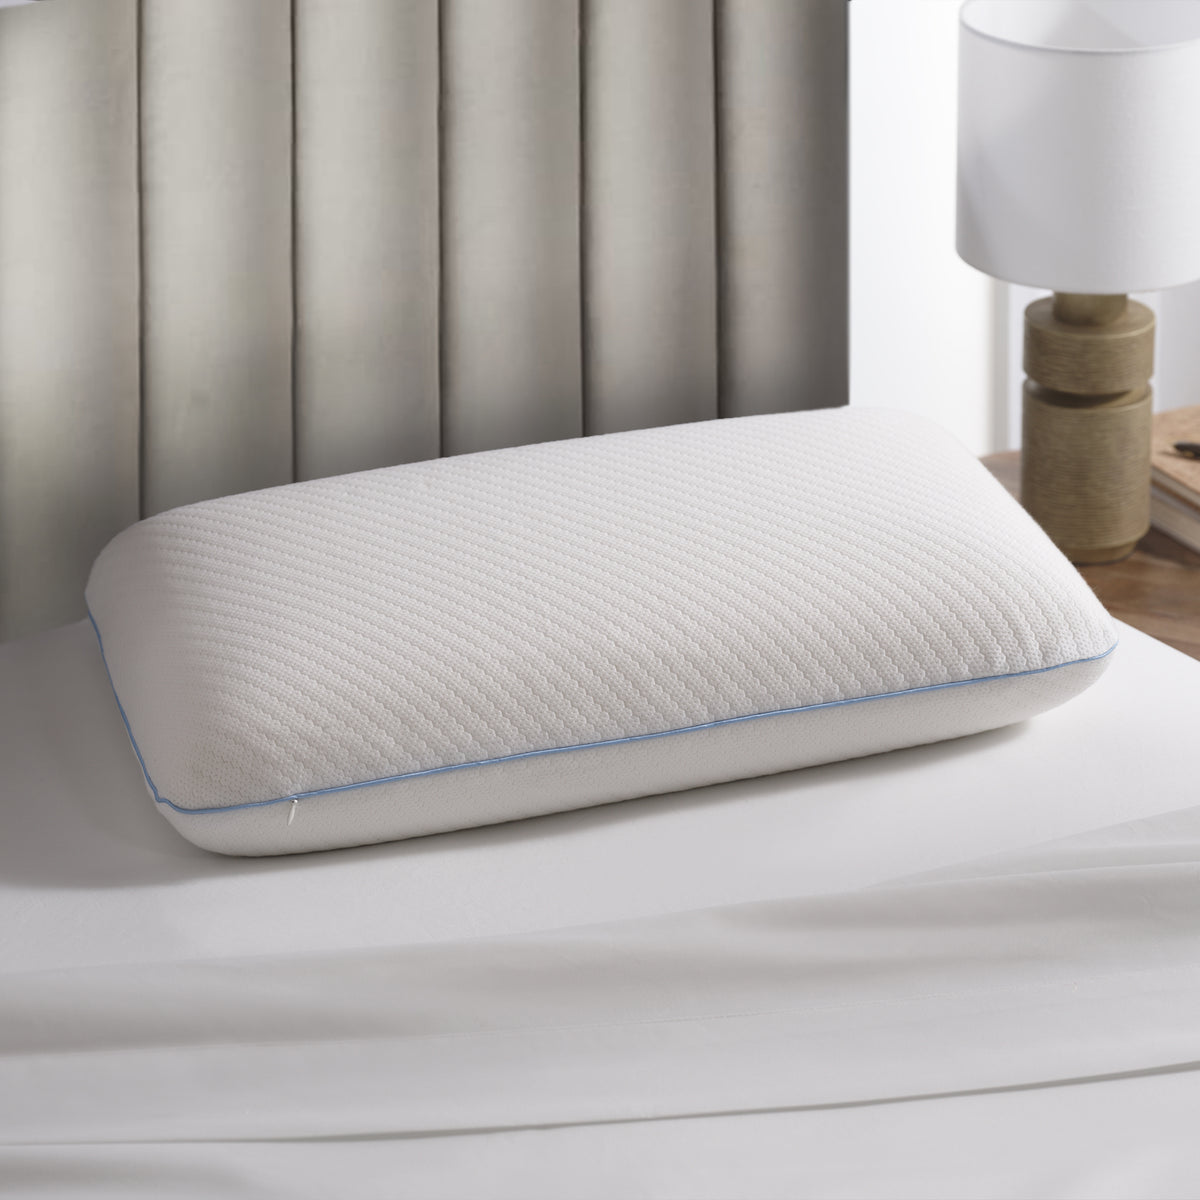 Bio Based Foam Bed Pillow with Tencel Cover - Allied Home